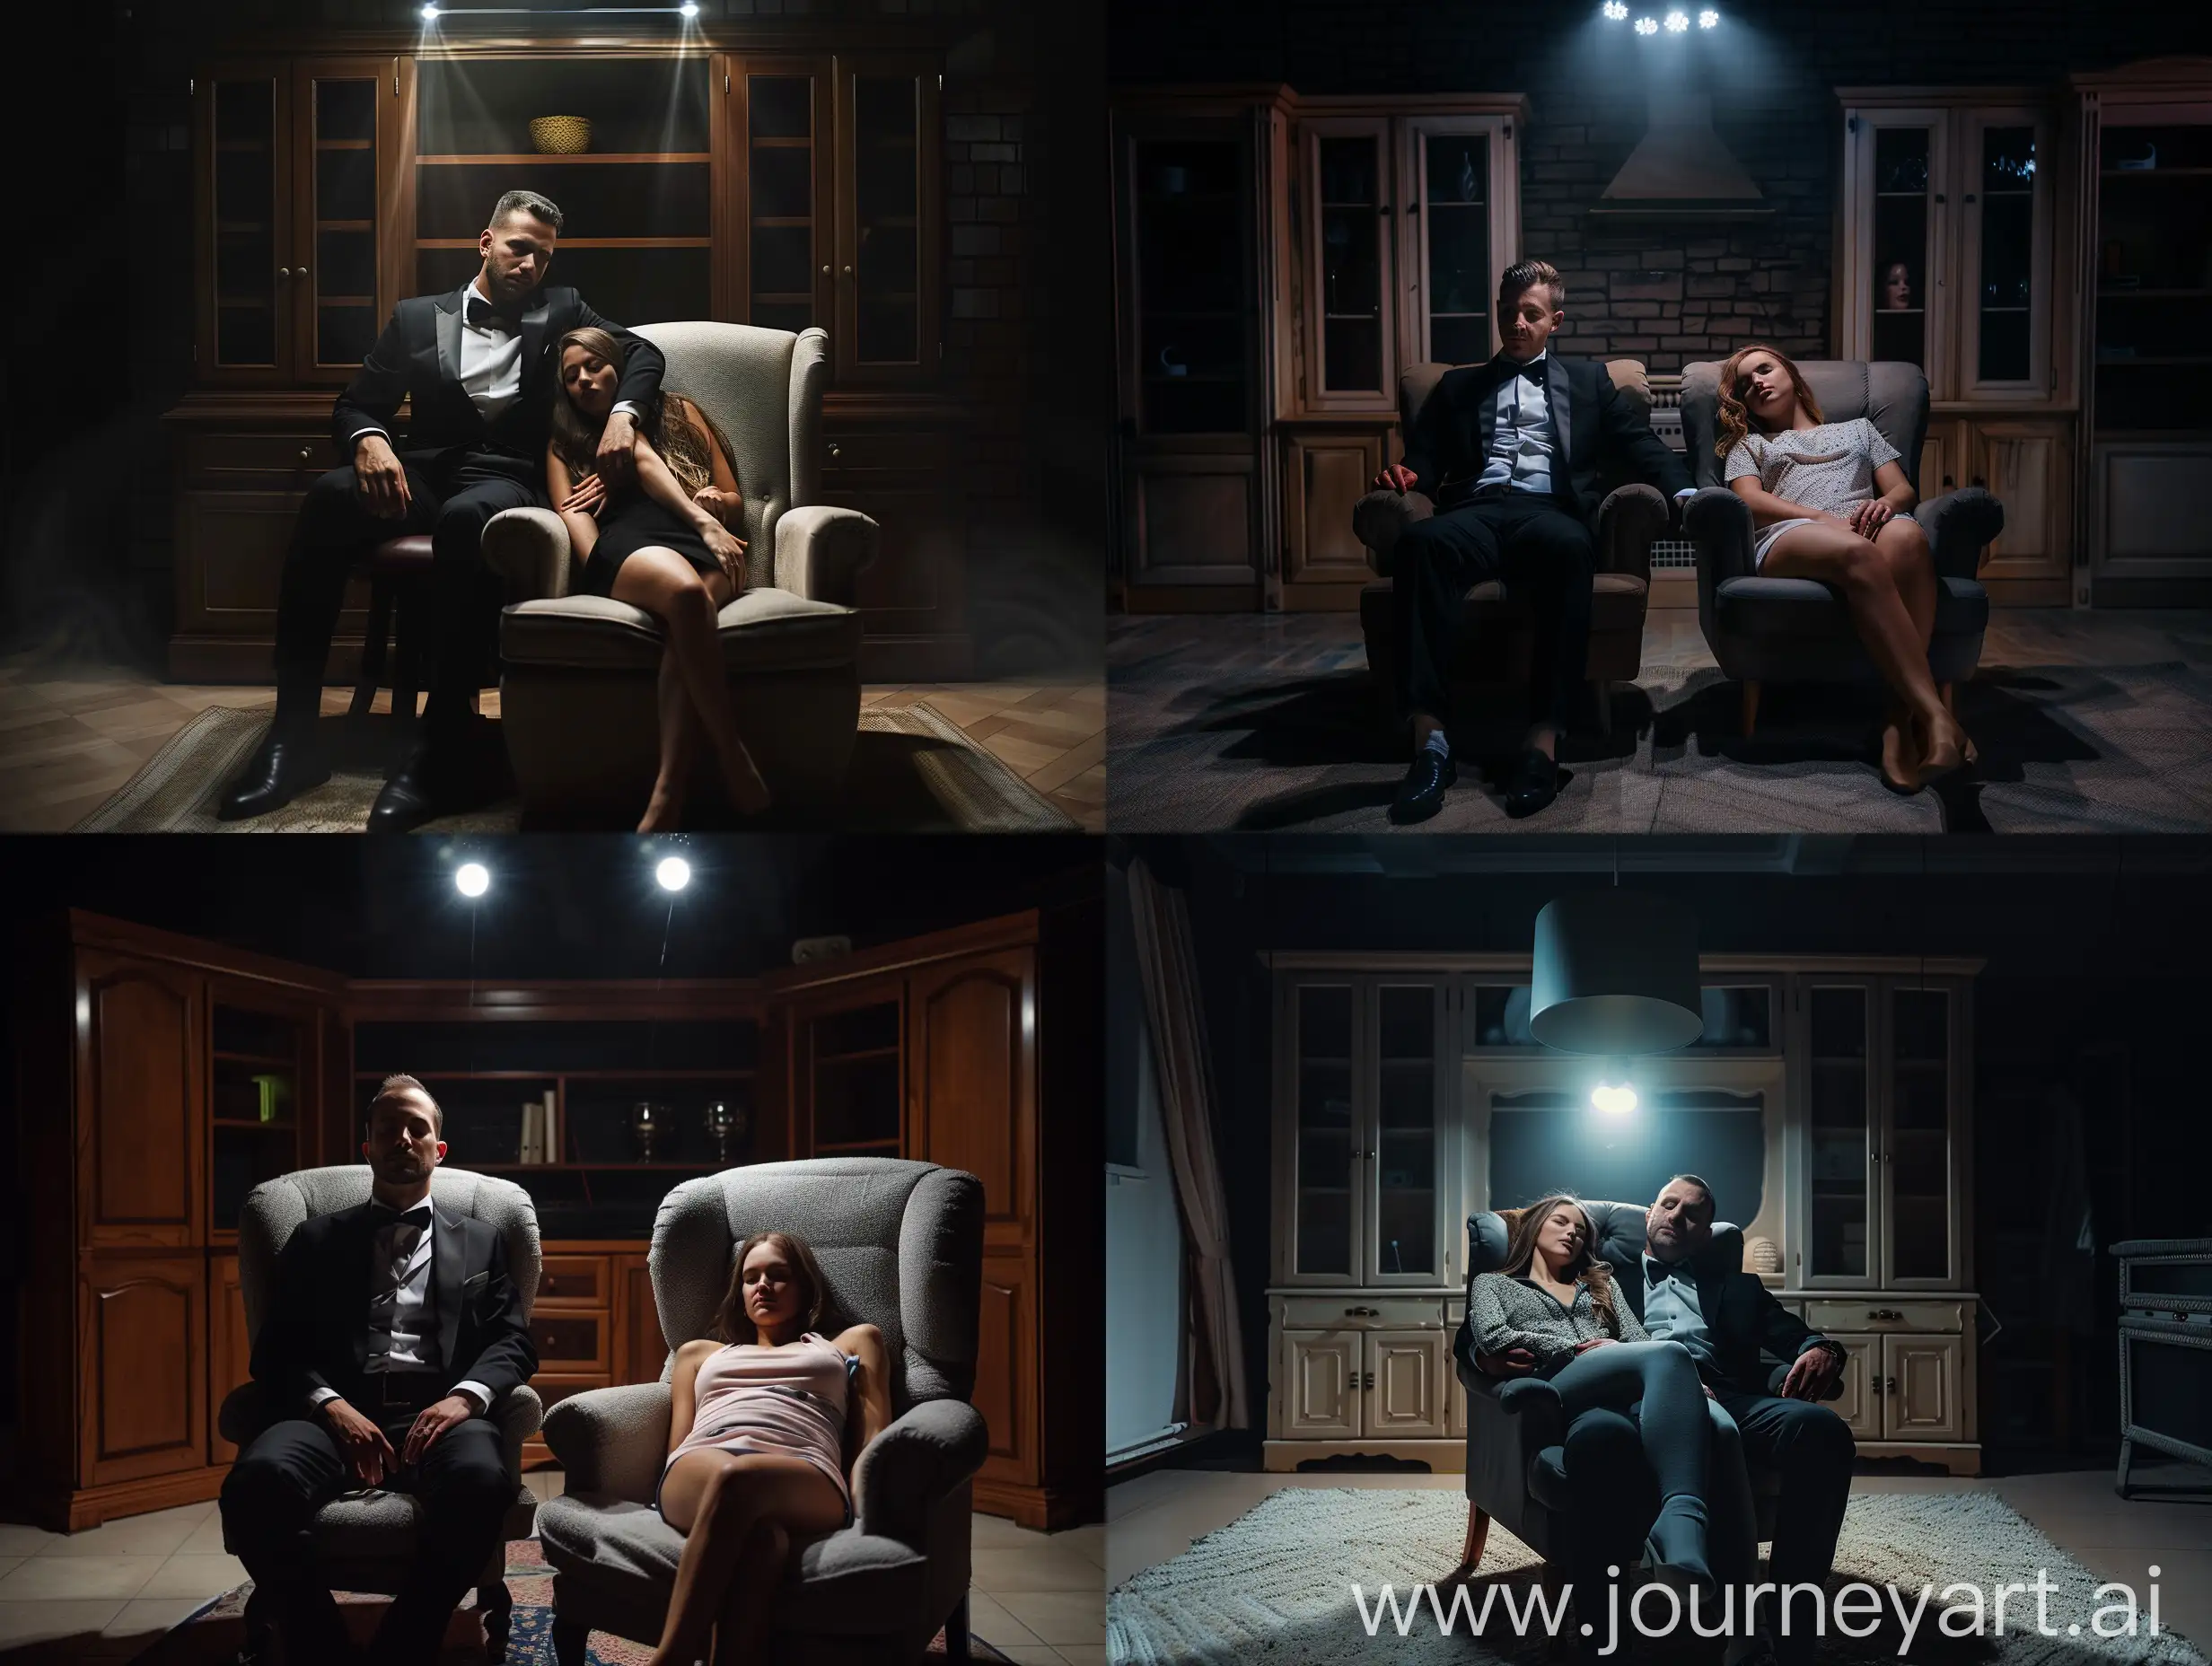 hypnotist therapist wearing tuxedo and his female subject asleep sitting on armchair, inside cabinet room, dark room with point lighting